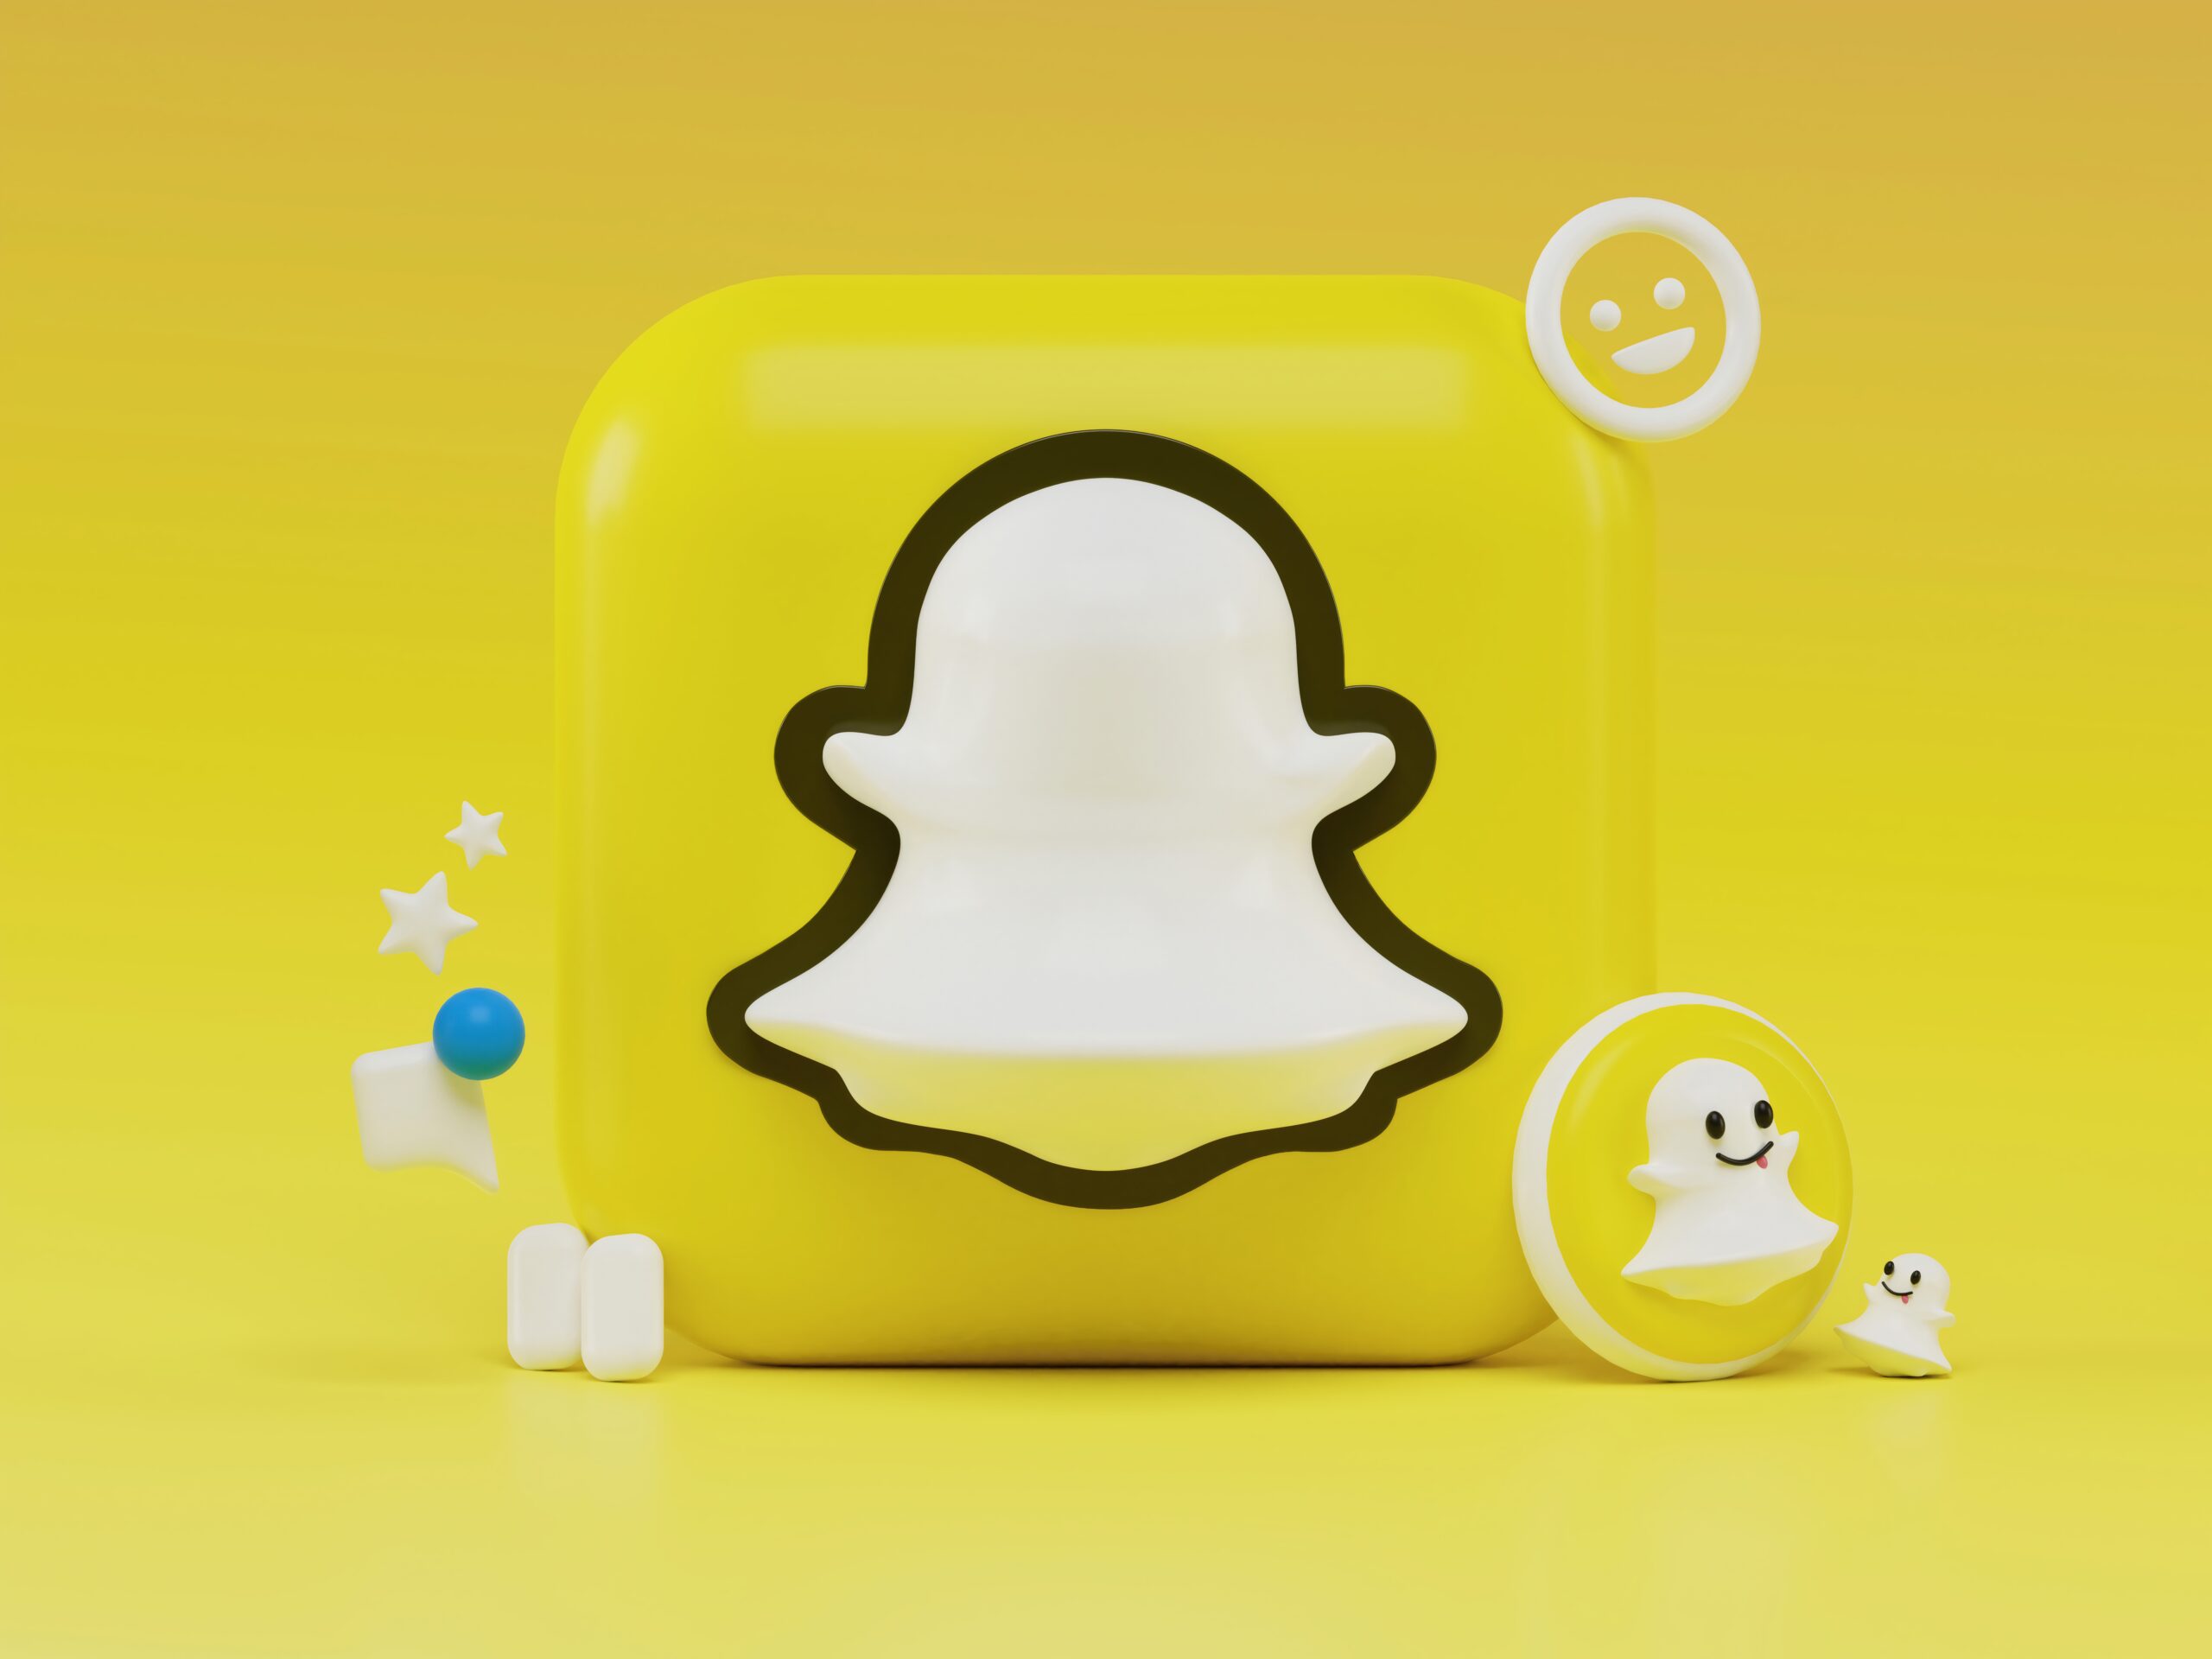 Snapchat: How to unlock your account